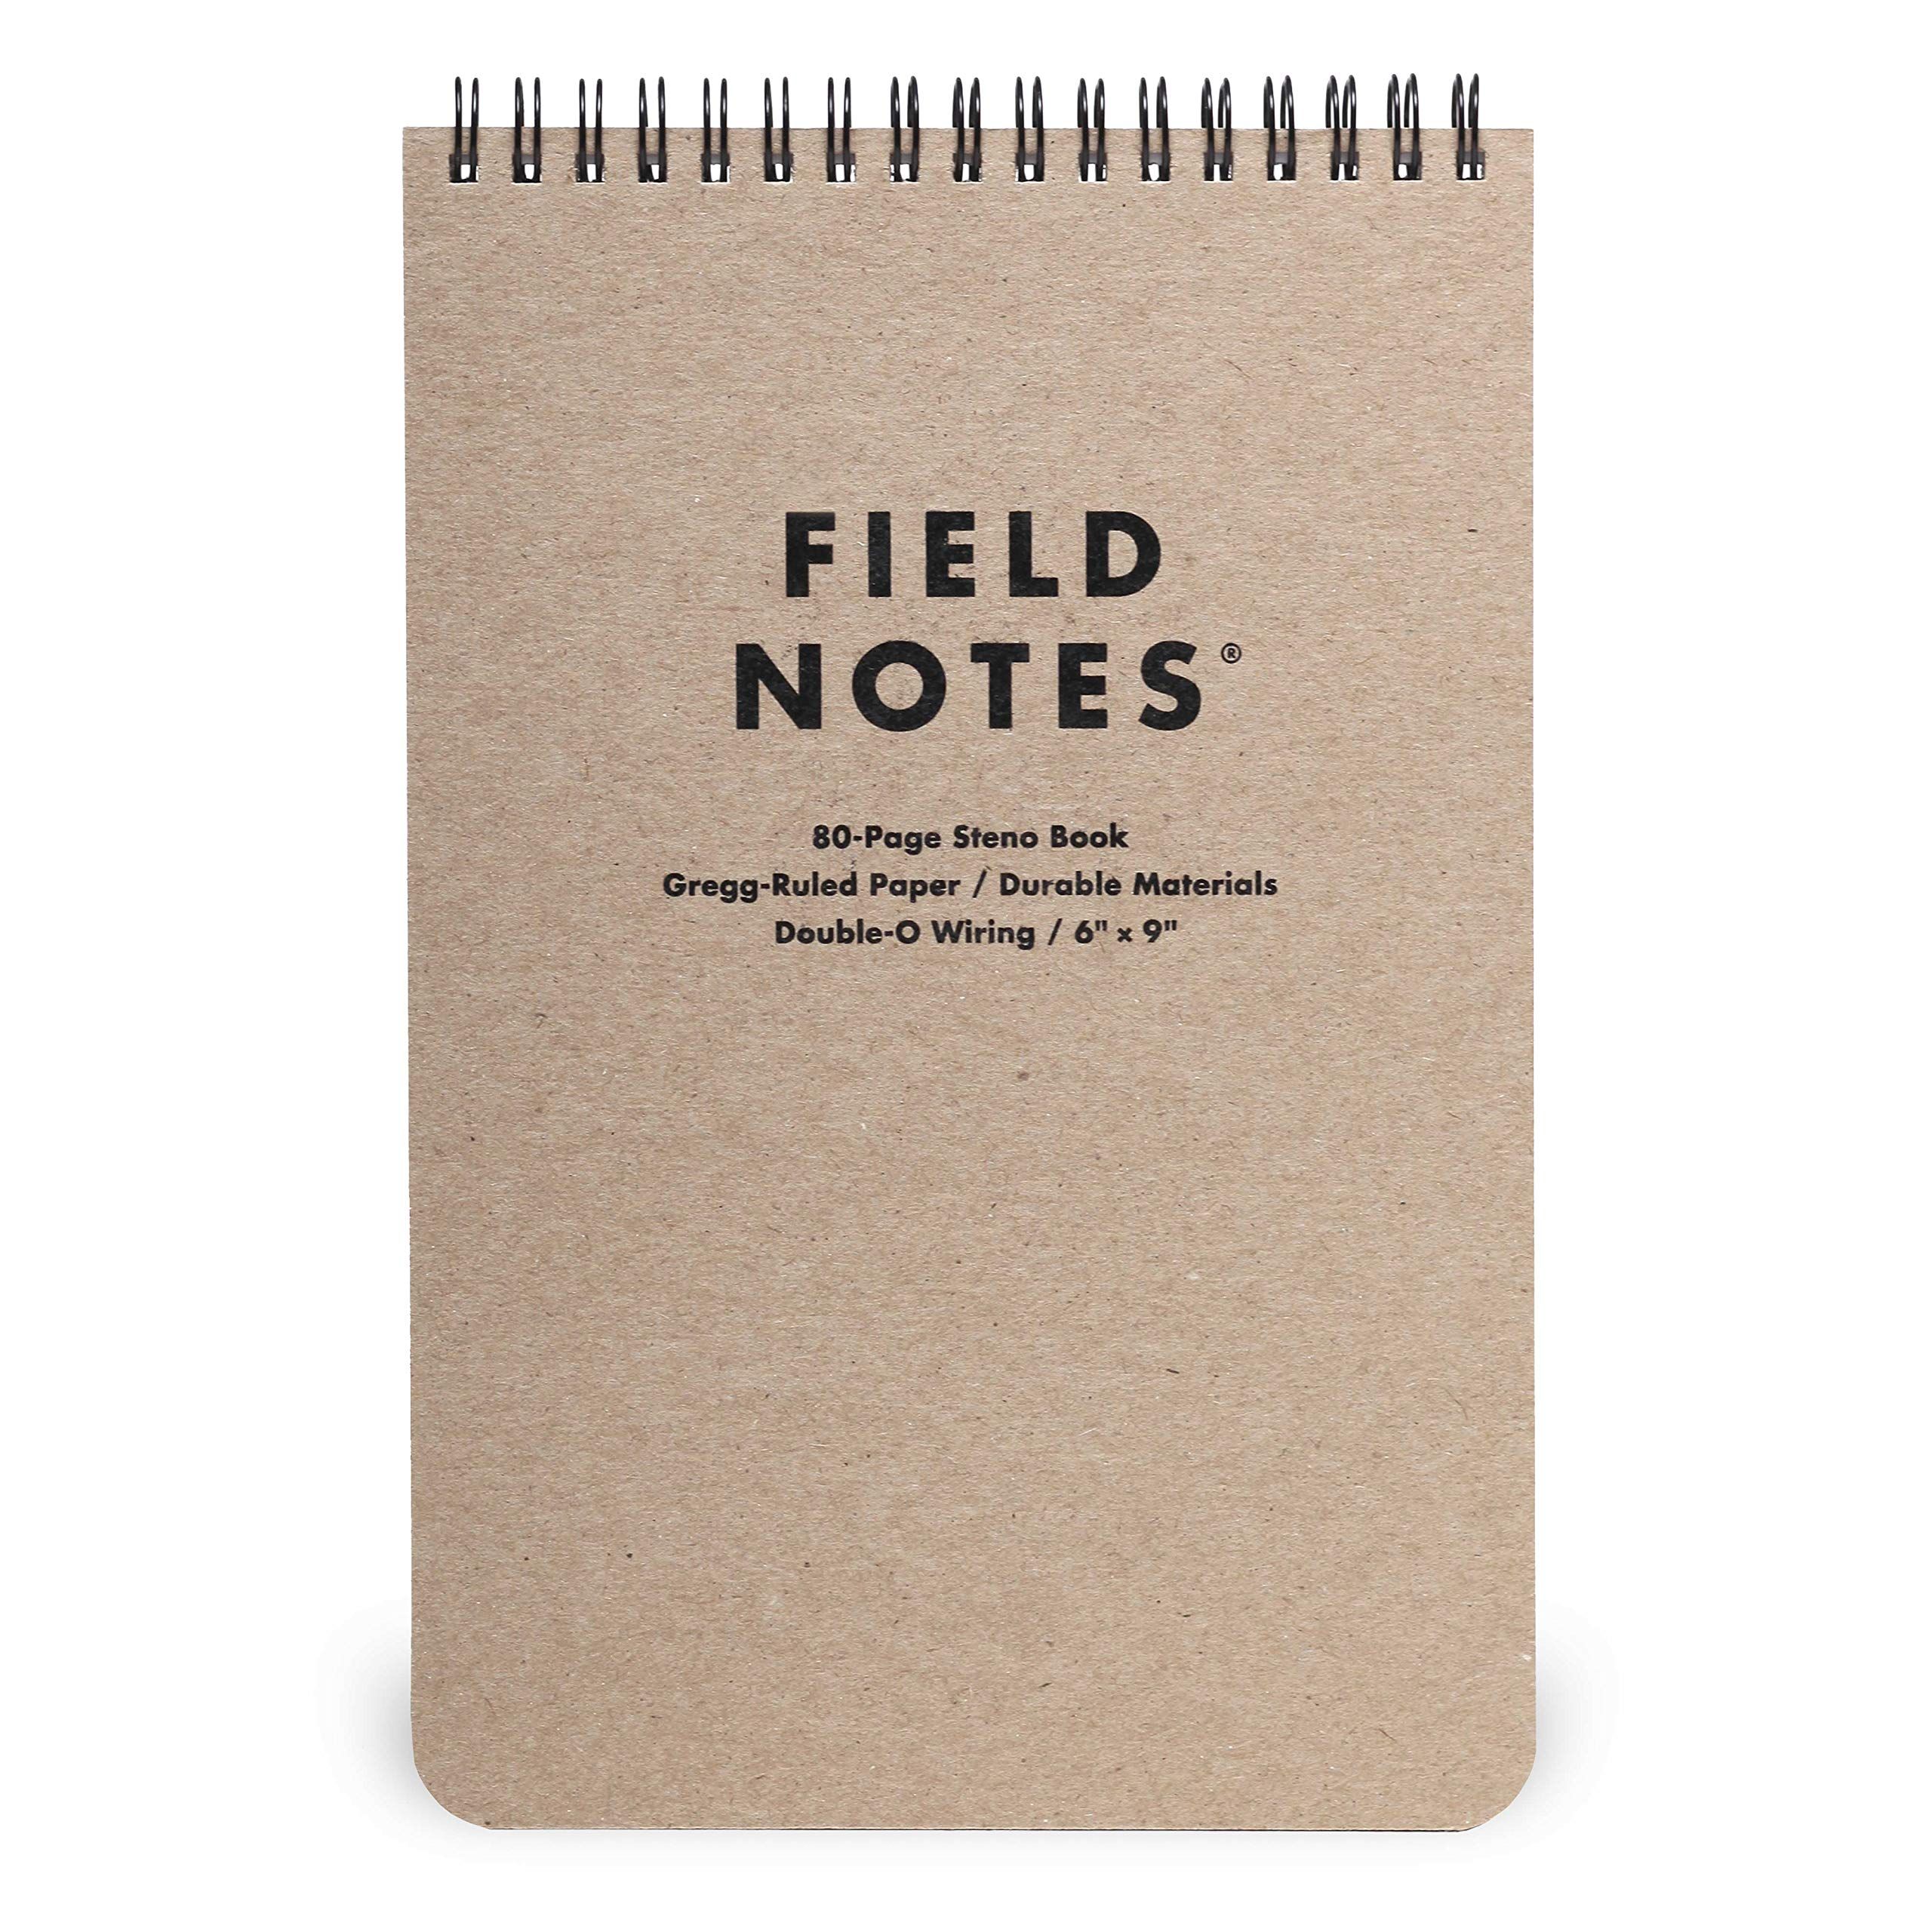 Field Notes - Steno Pad, 80 Pages - 6" x 9" | Amazon (US)